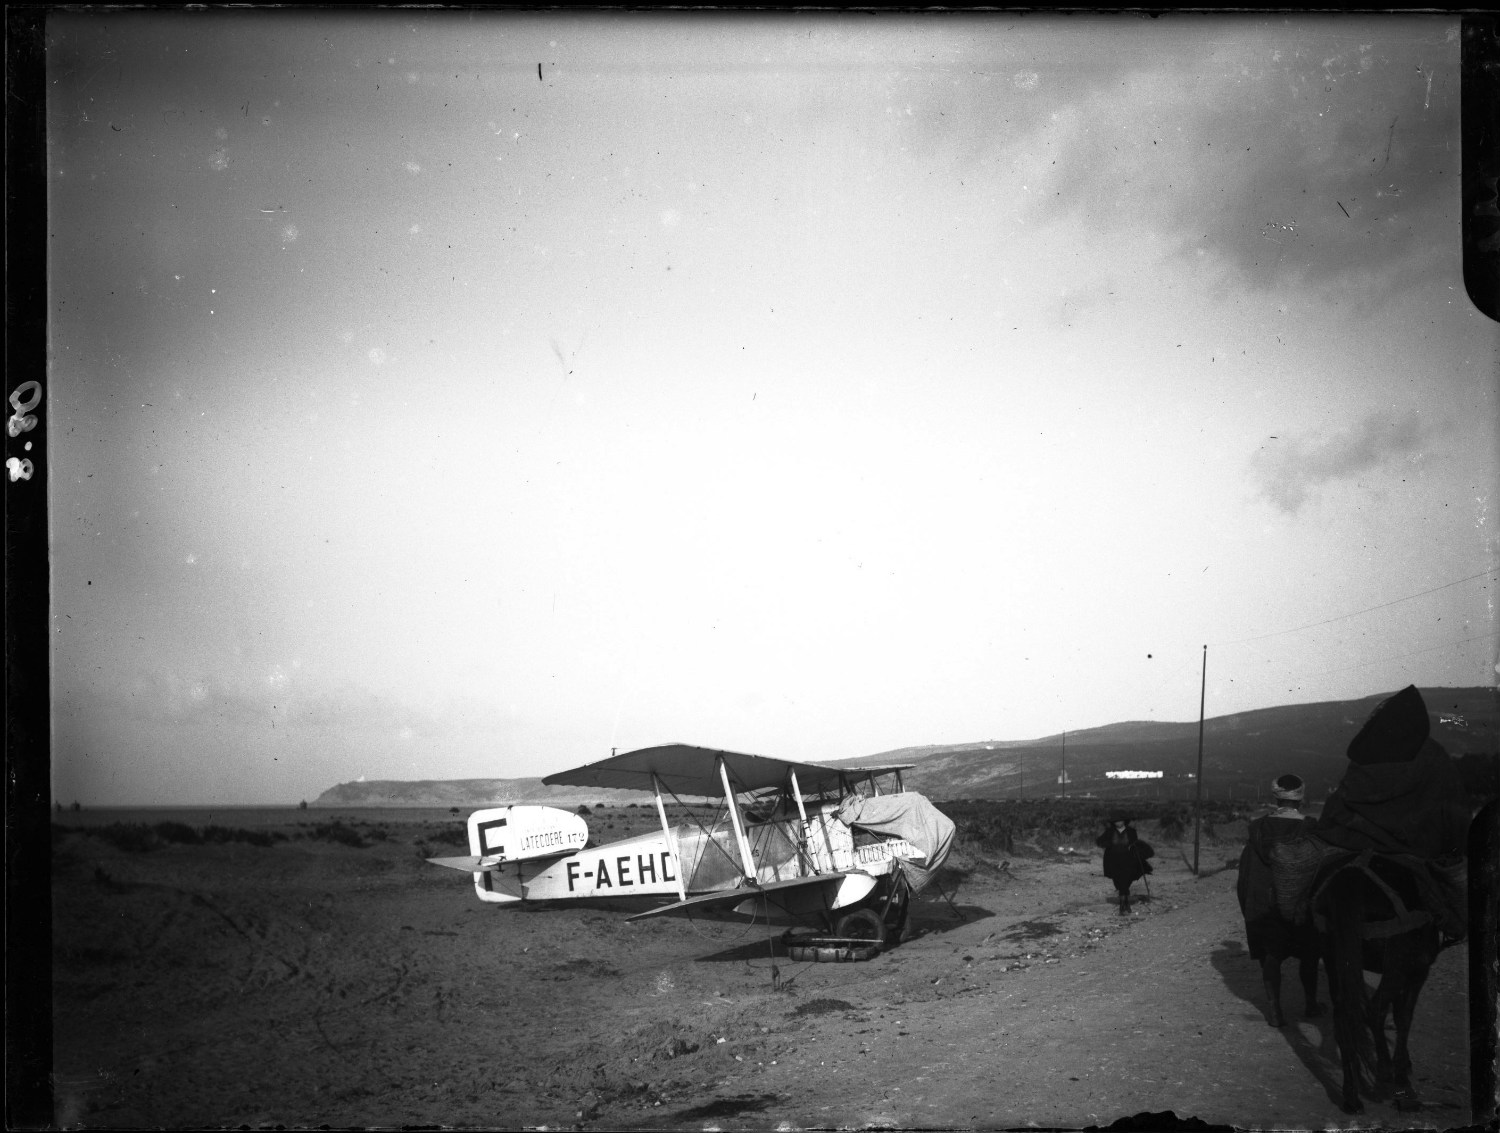 Side view of small white plane under tarp, men on horseback and walking in Moroccan dress